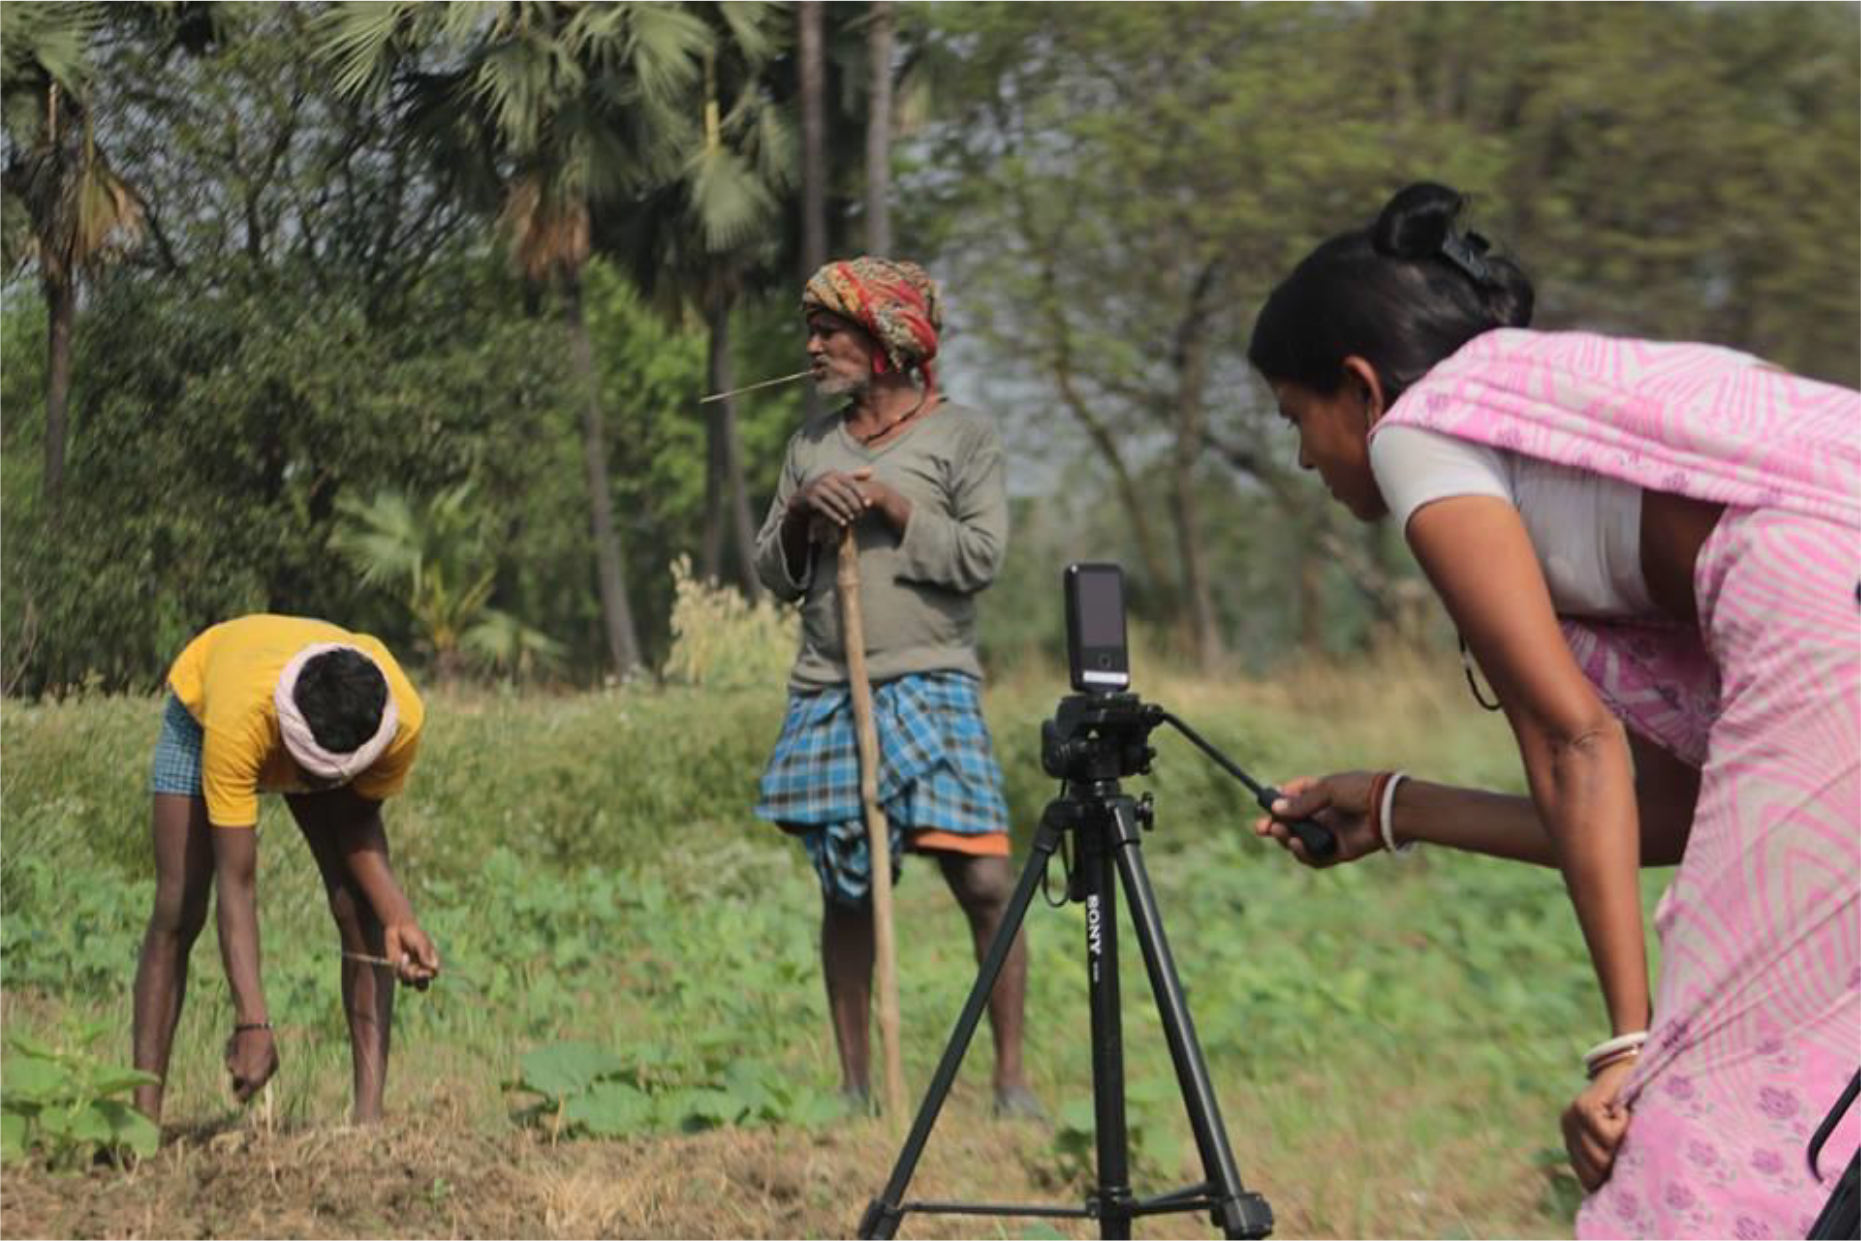 The image shows a woman shooting a video of two men working in the field.